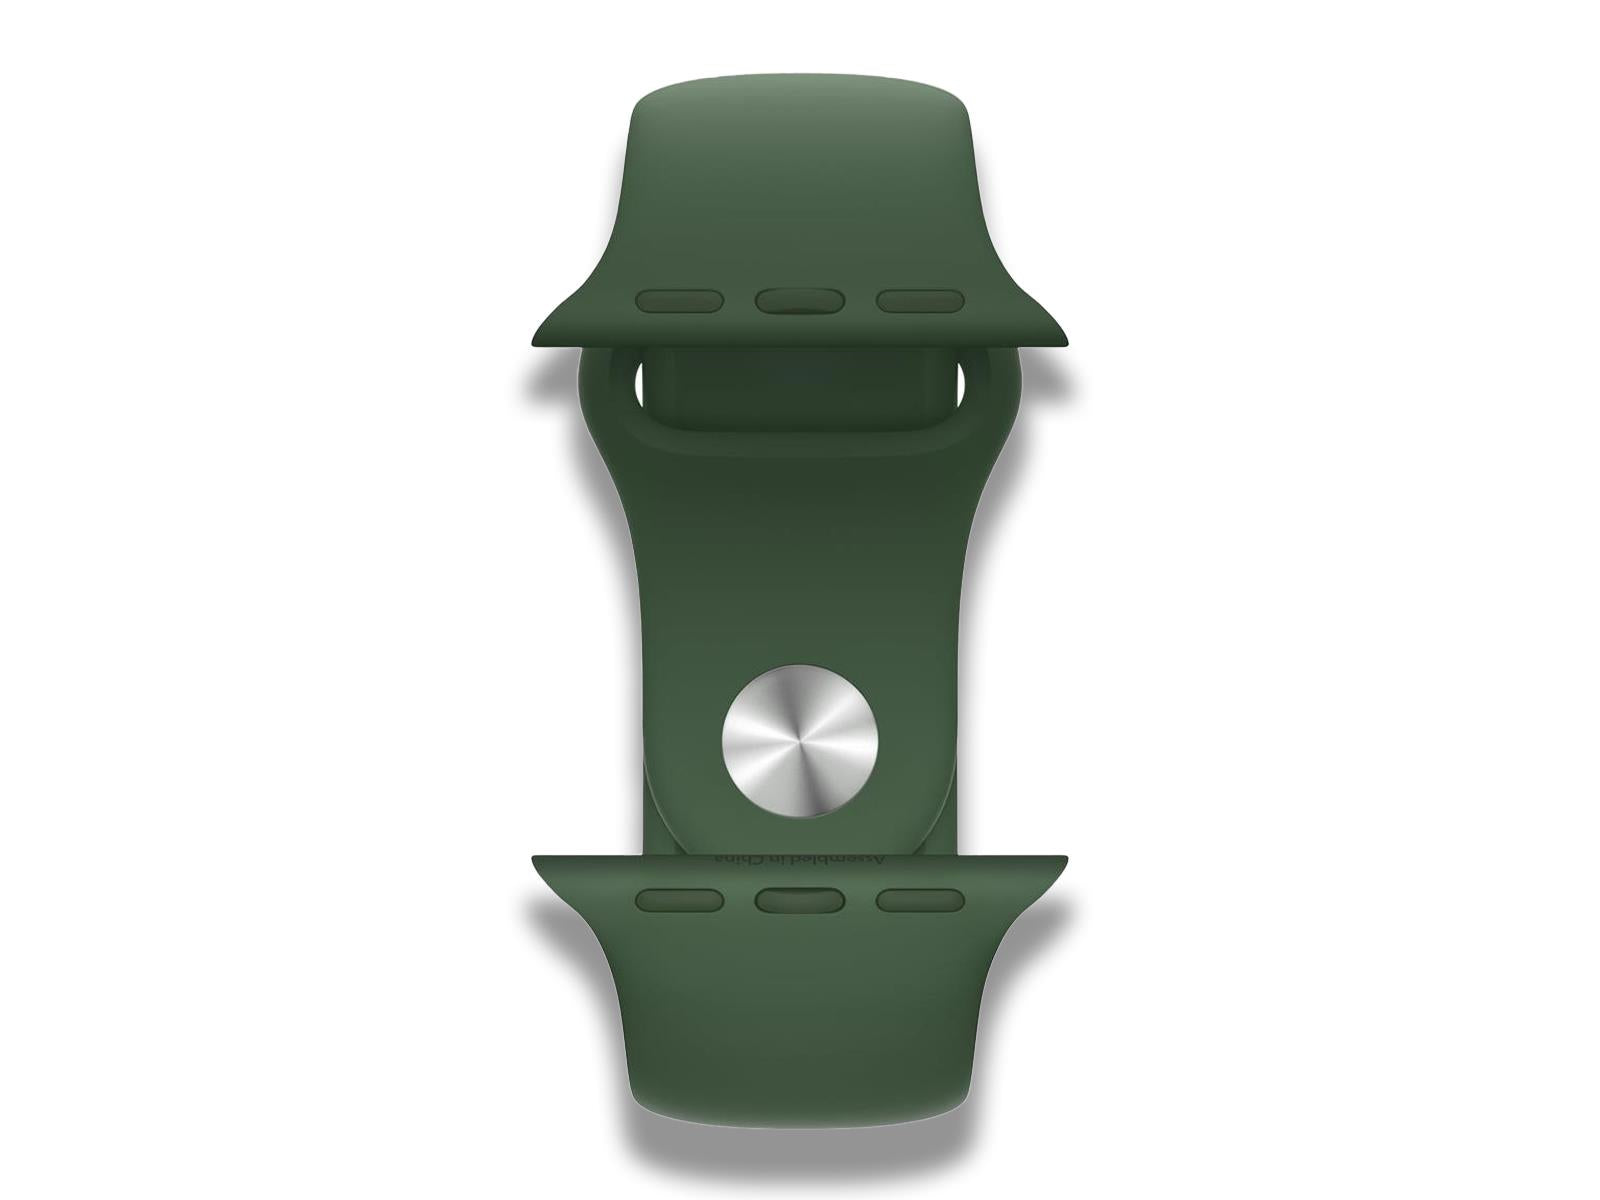 Image shows the clover strap that comes with the Apple Watch Series 7